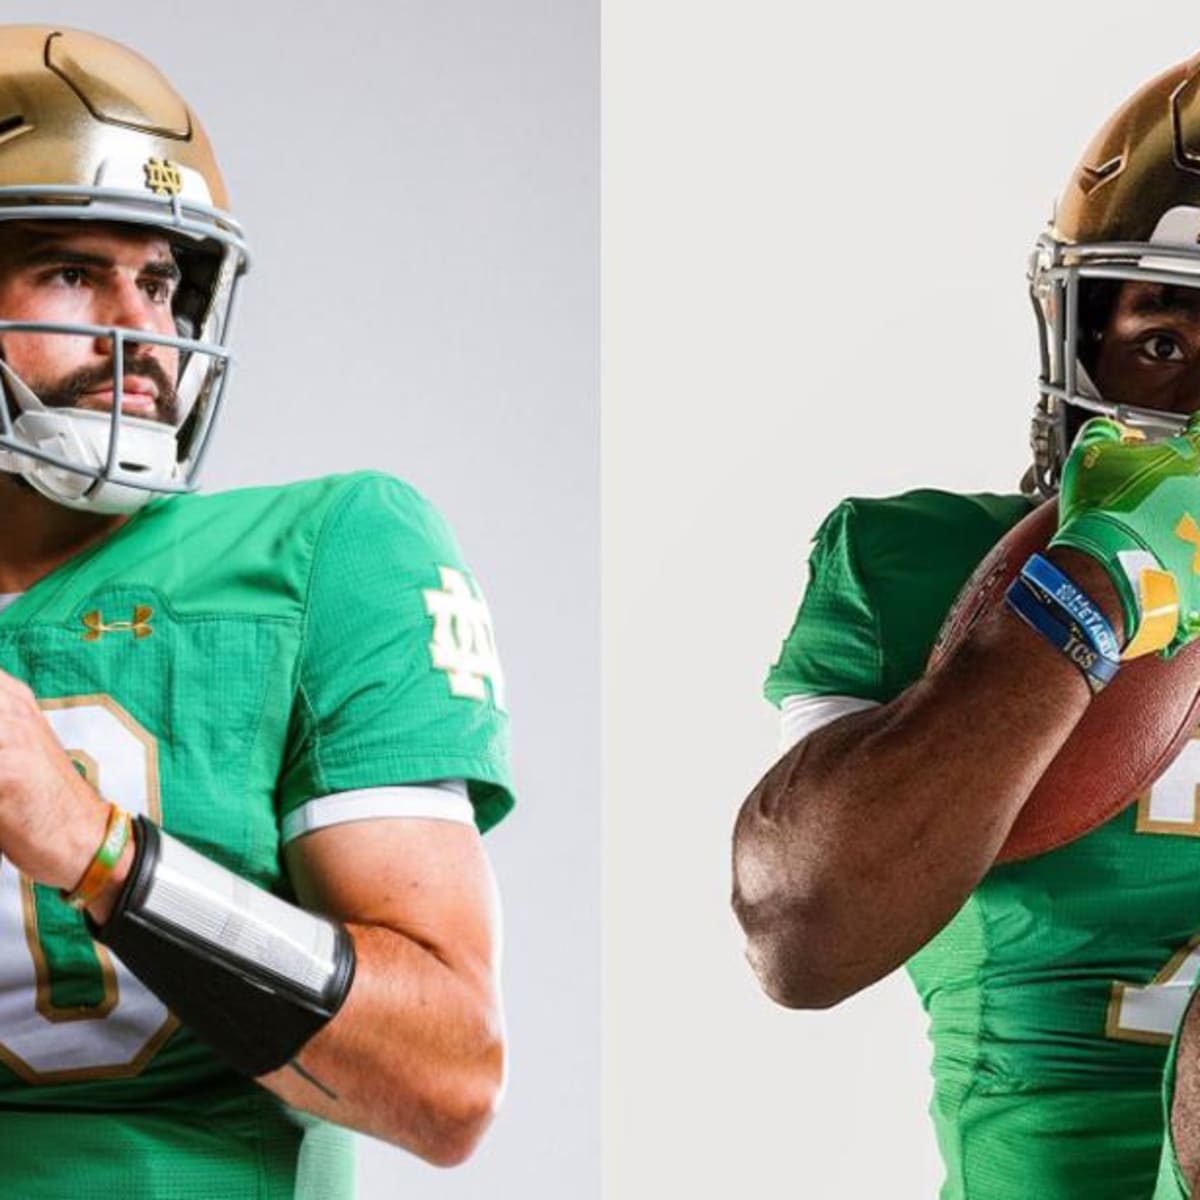 Notre Dame To Wear Green vs. Ohio State: Right Idea, Wrong Delivery